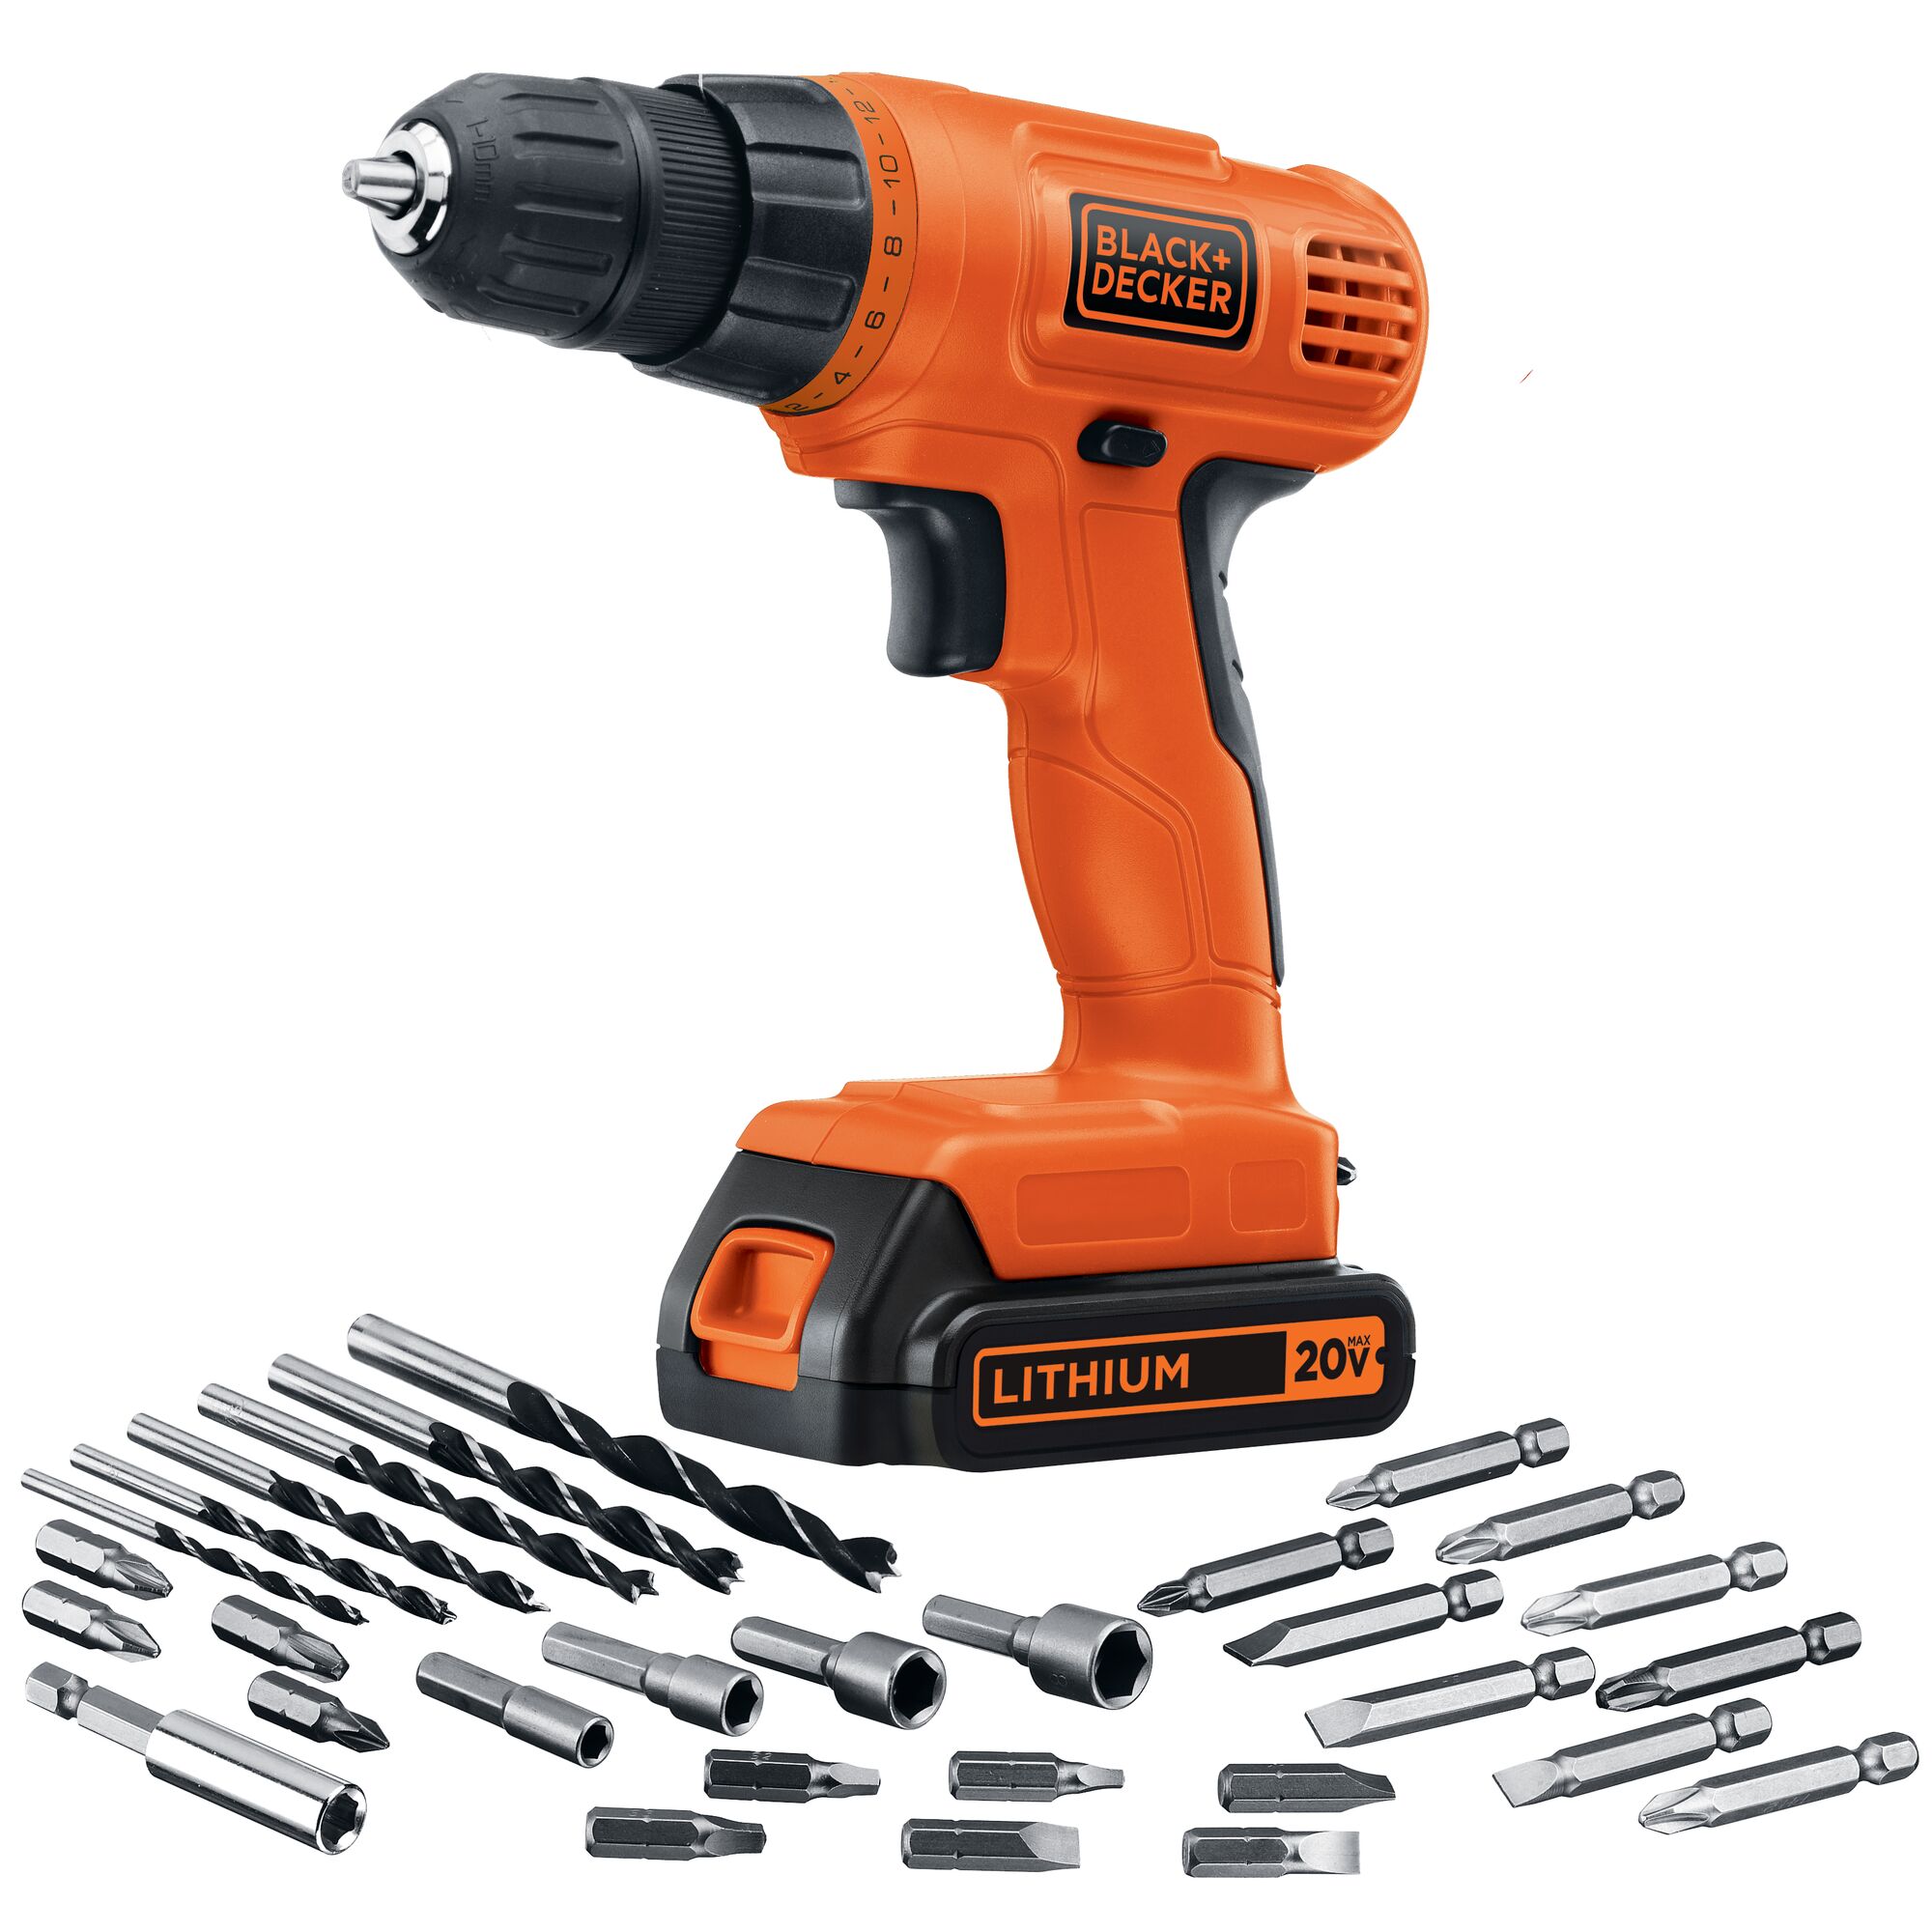 BLACK+DECKER 20-volt 3/8-in Cordless Drill (1-Battery Included, Charger  Included at